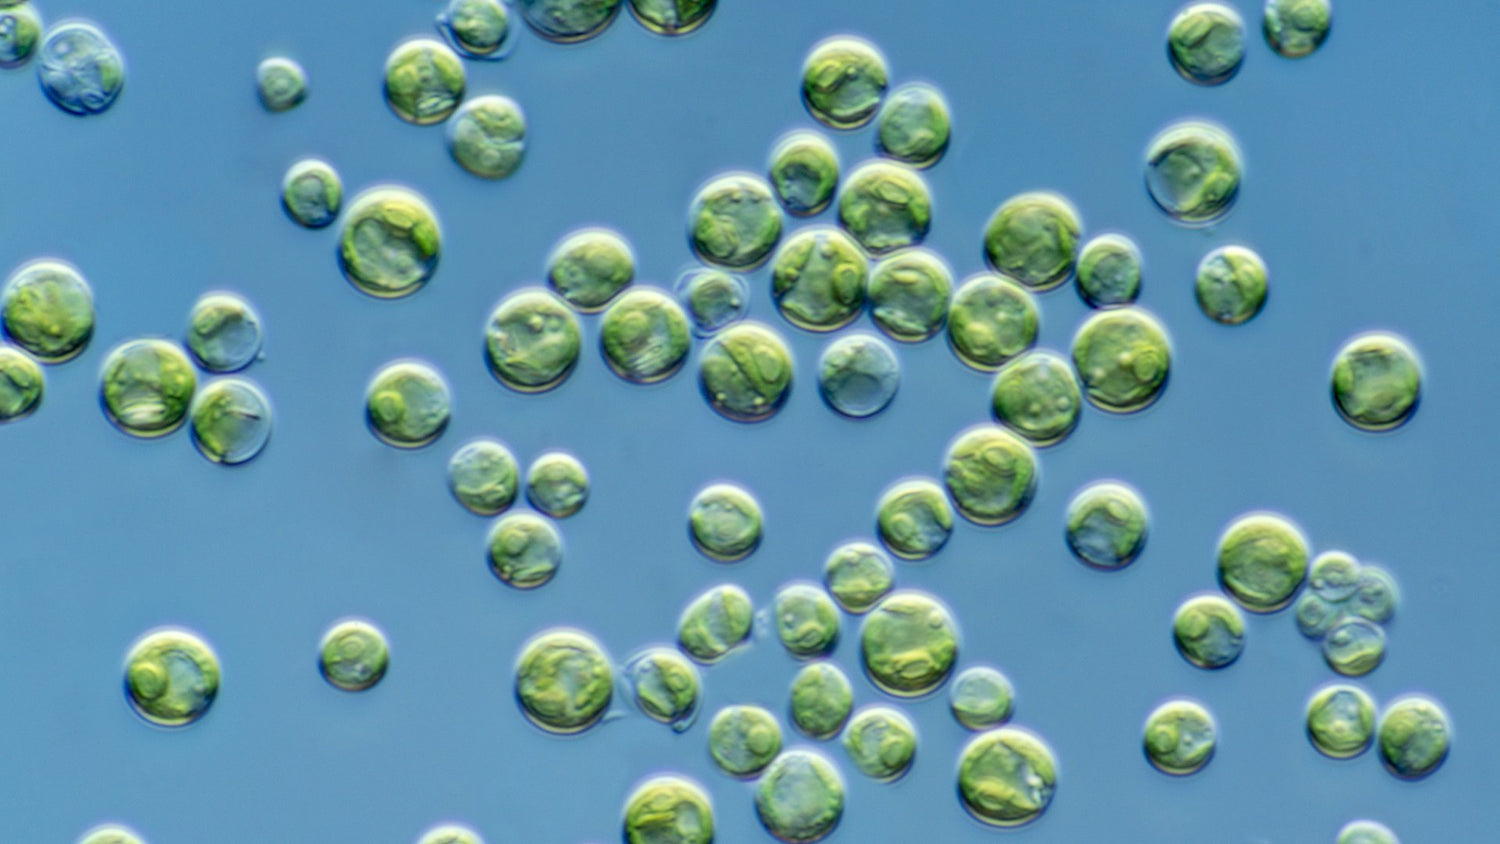 Chlorella vulgaris - A Photo of Green Microalgae, Chlorella vulgaris, a Single-celled Freshwater Algae,  It typically features a green, spherical or oval-shaped cell with a smooth cell wall.